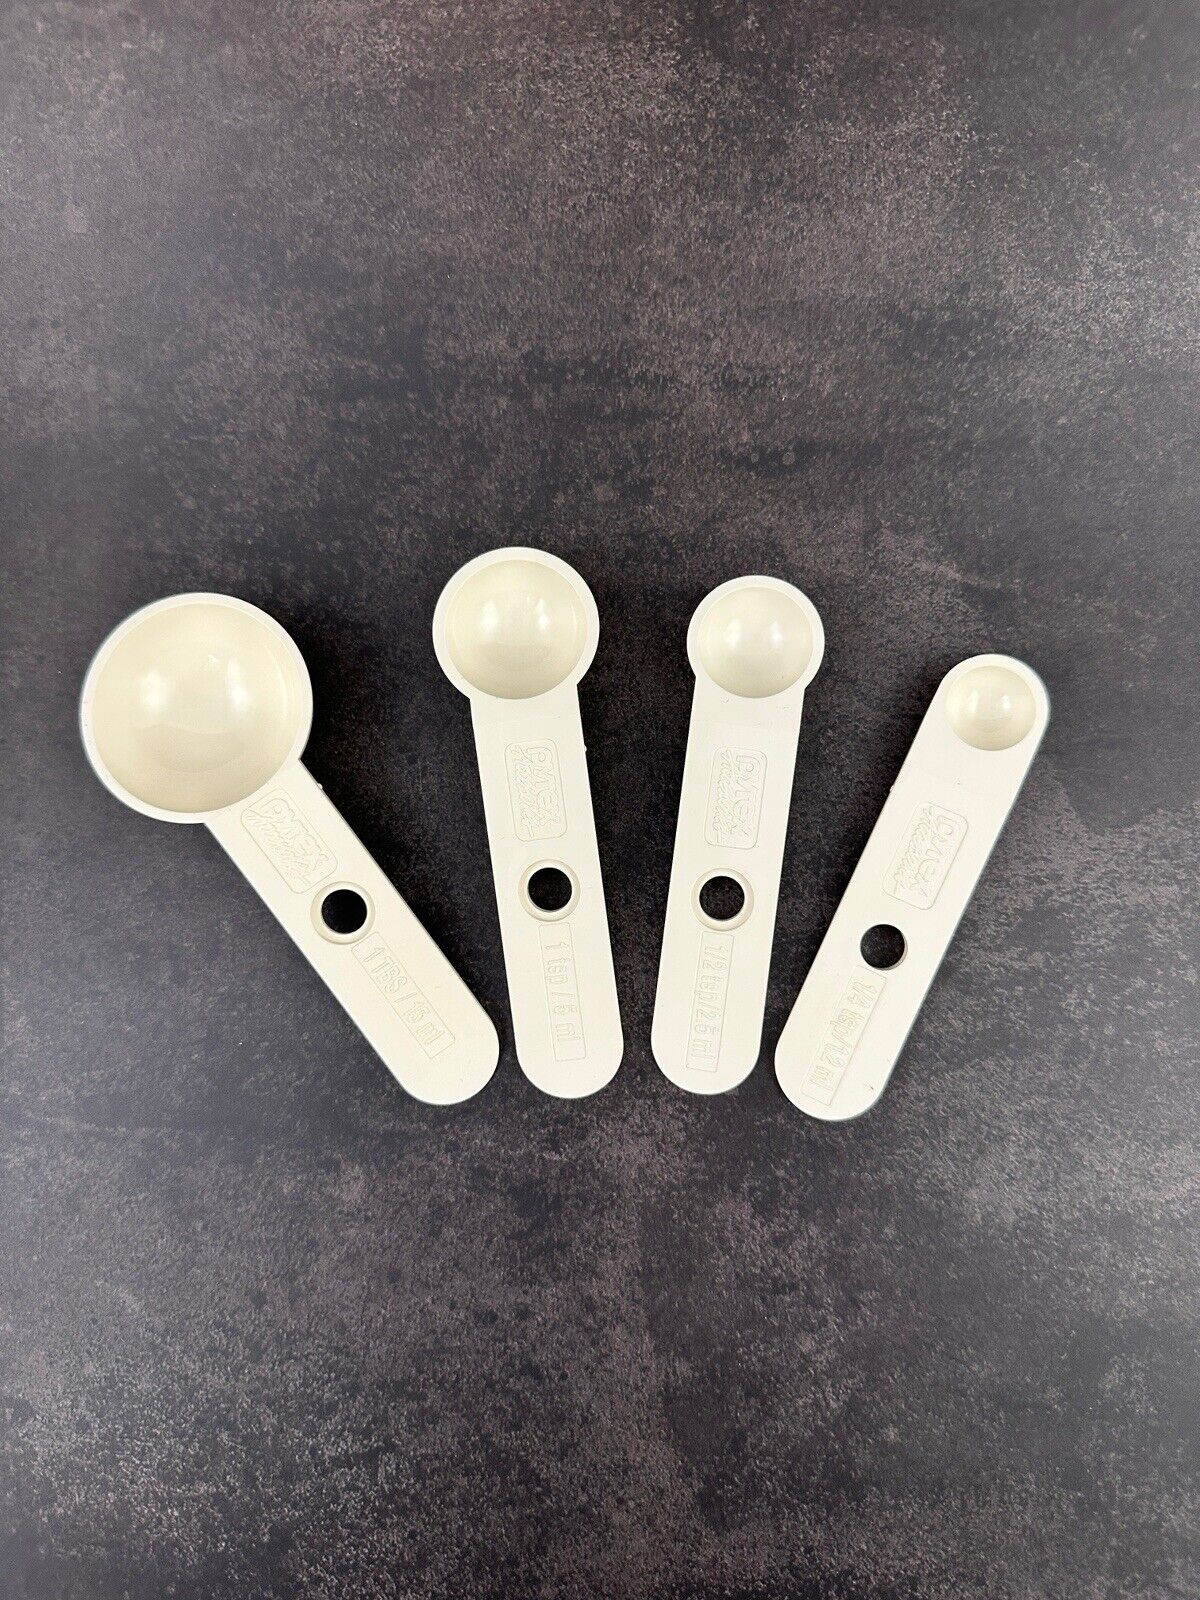 Vintage Pyrex Accessories Measuring Spoons Snap Together Set Of 4 Ivory USA